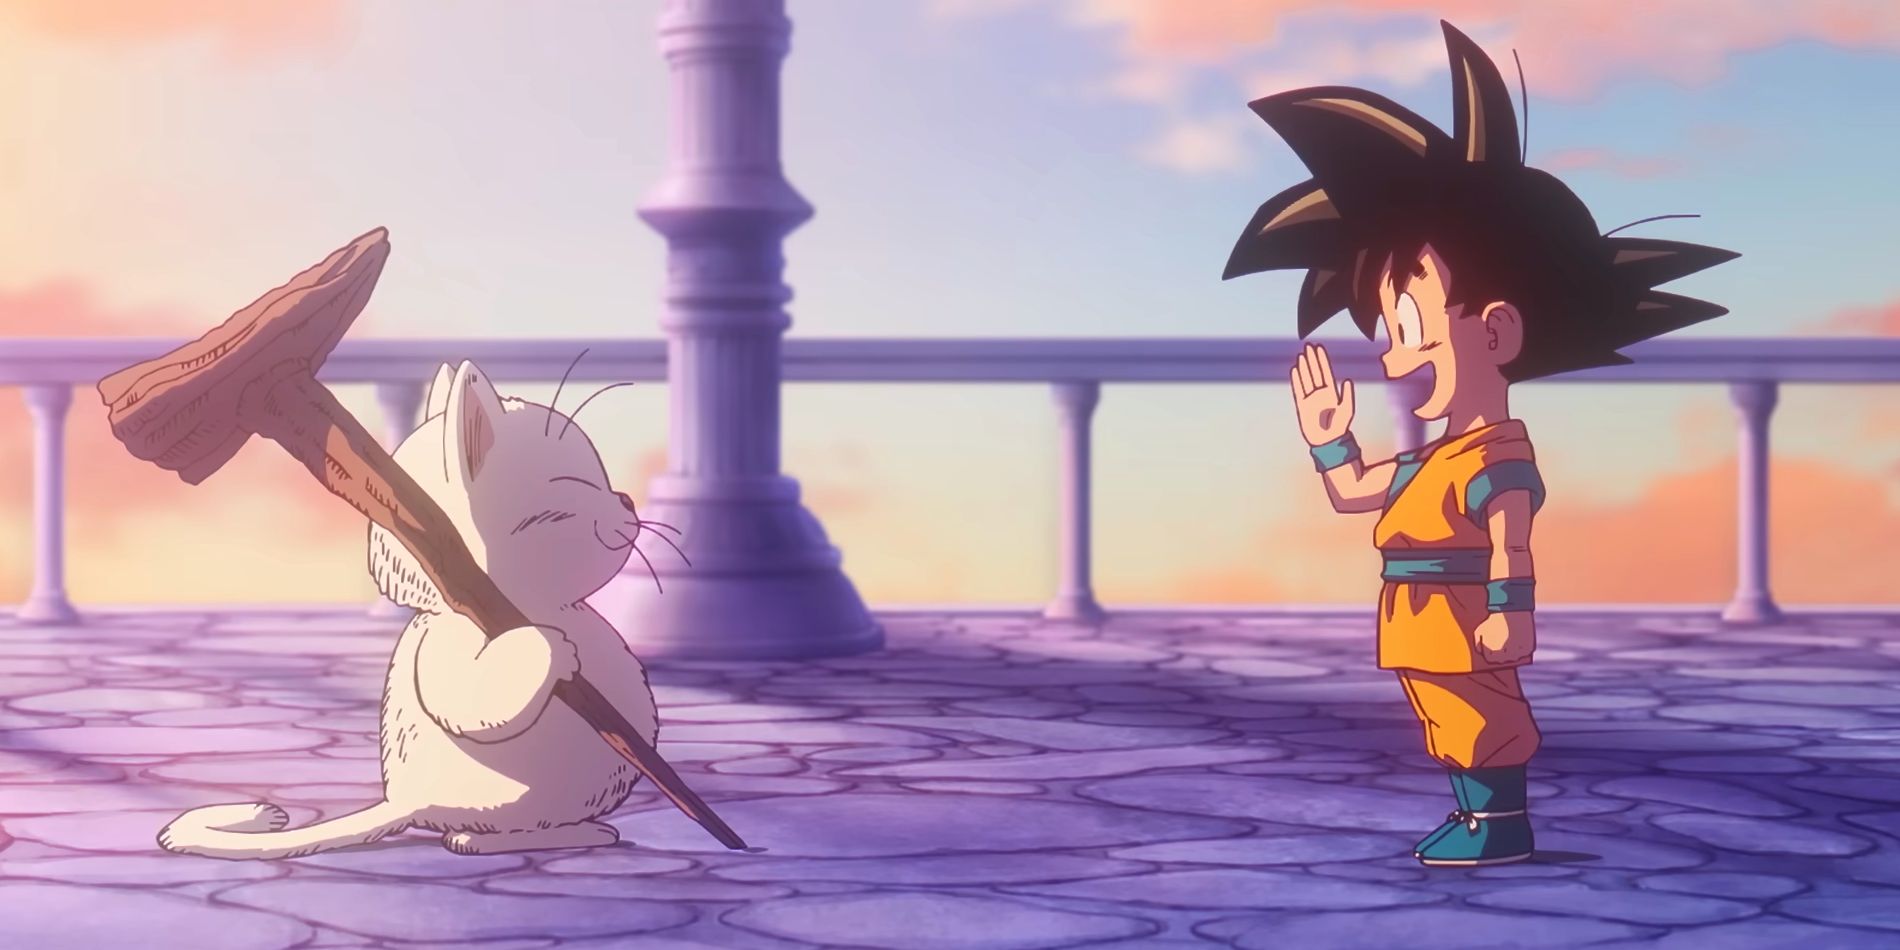 Screenshot from Dragon Ball Daima teaser shows a young Goku happily greeting the wise cat Korin on his lookout in the sky.